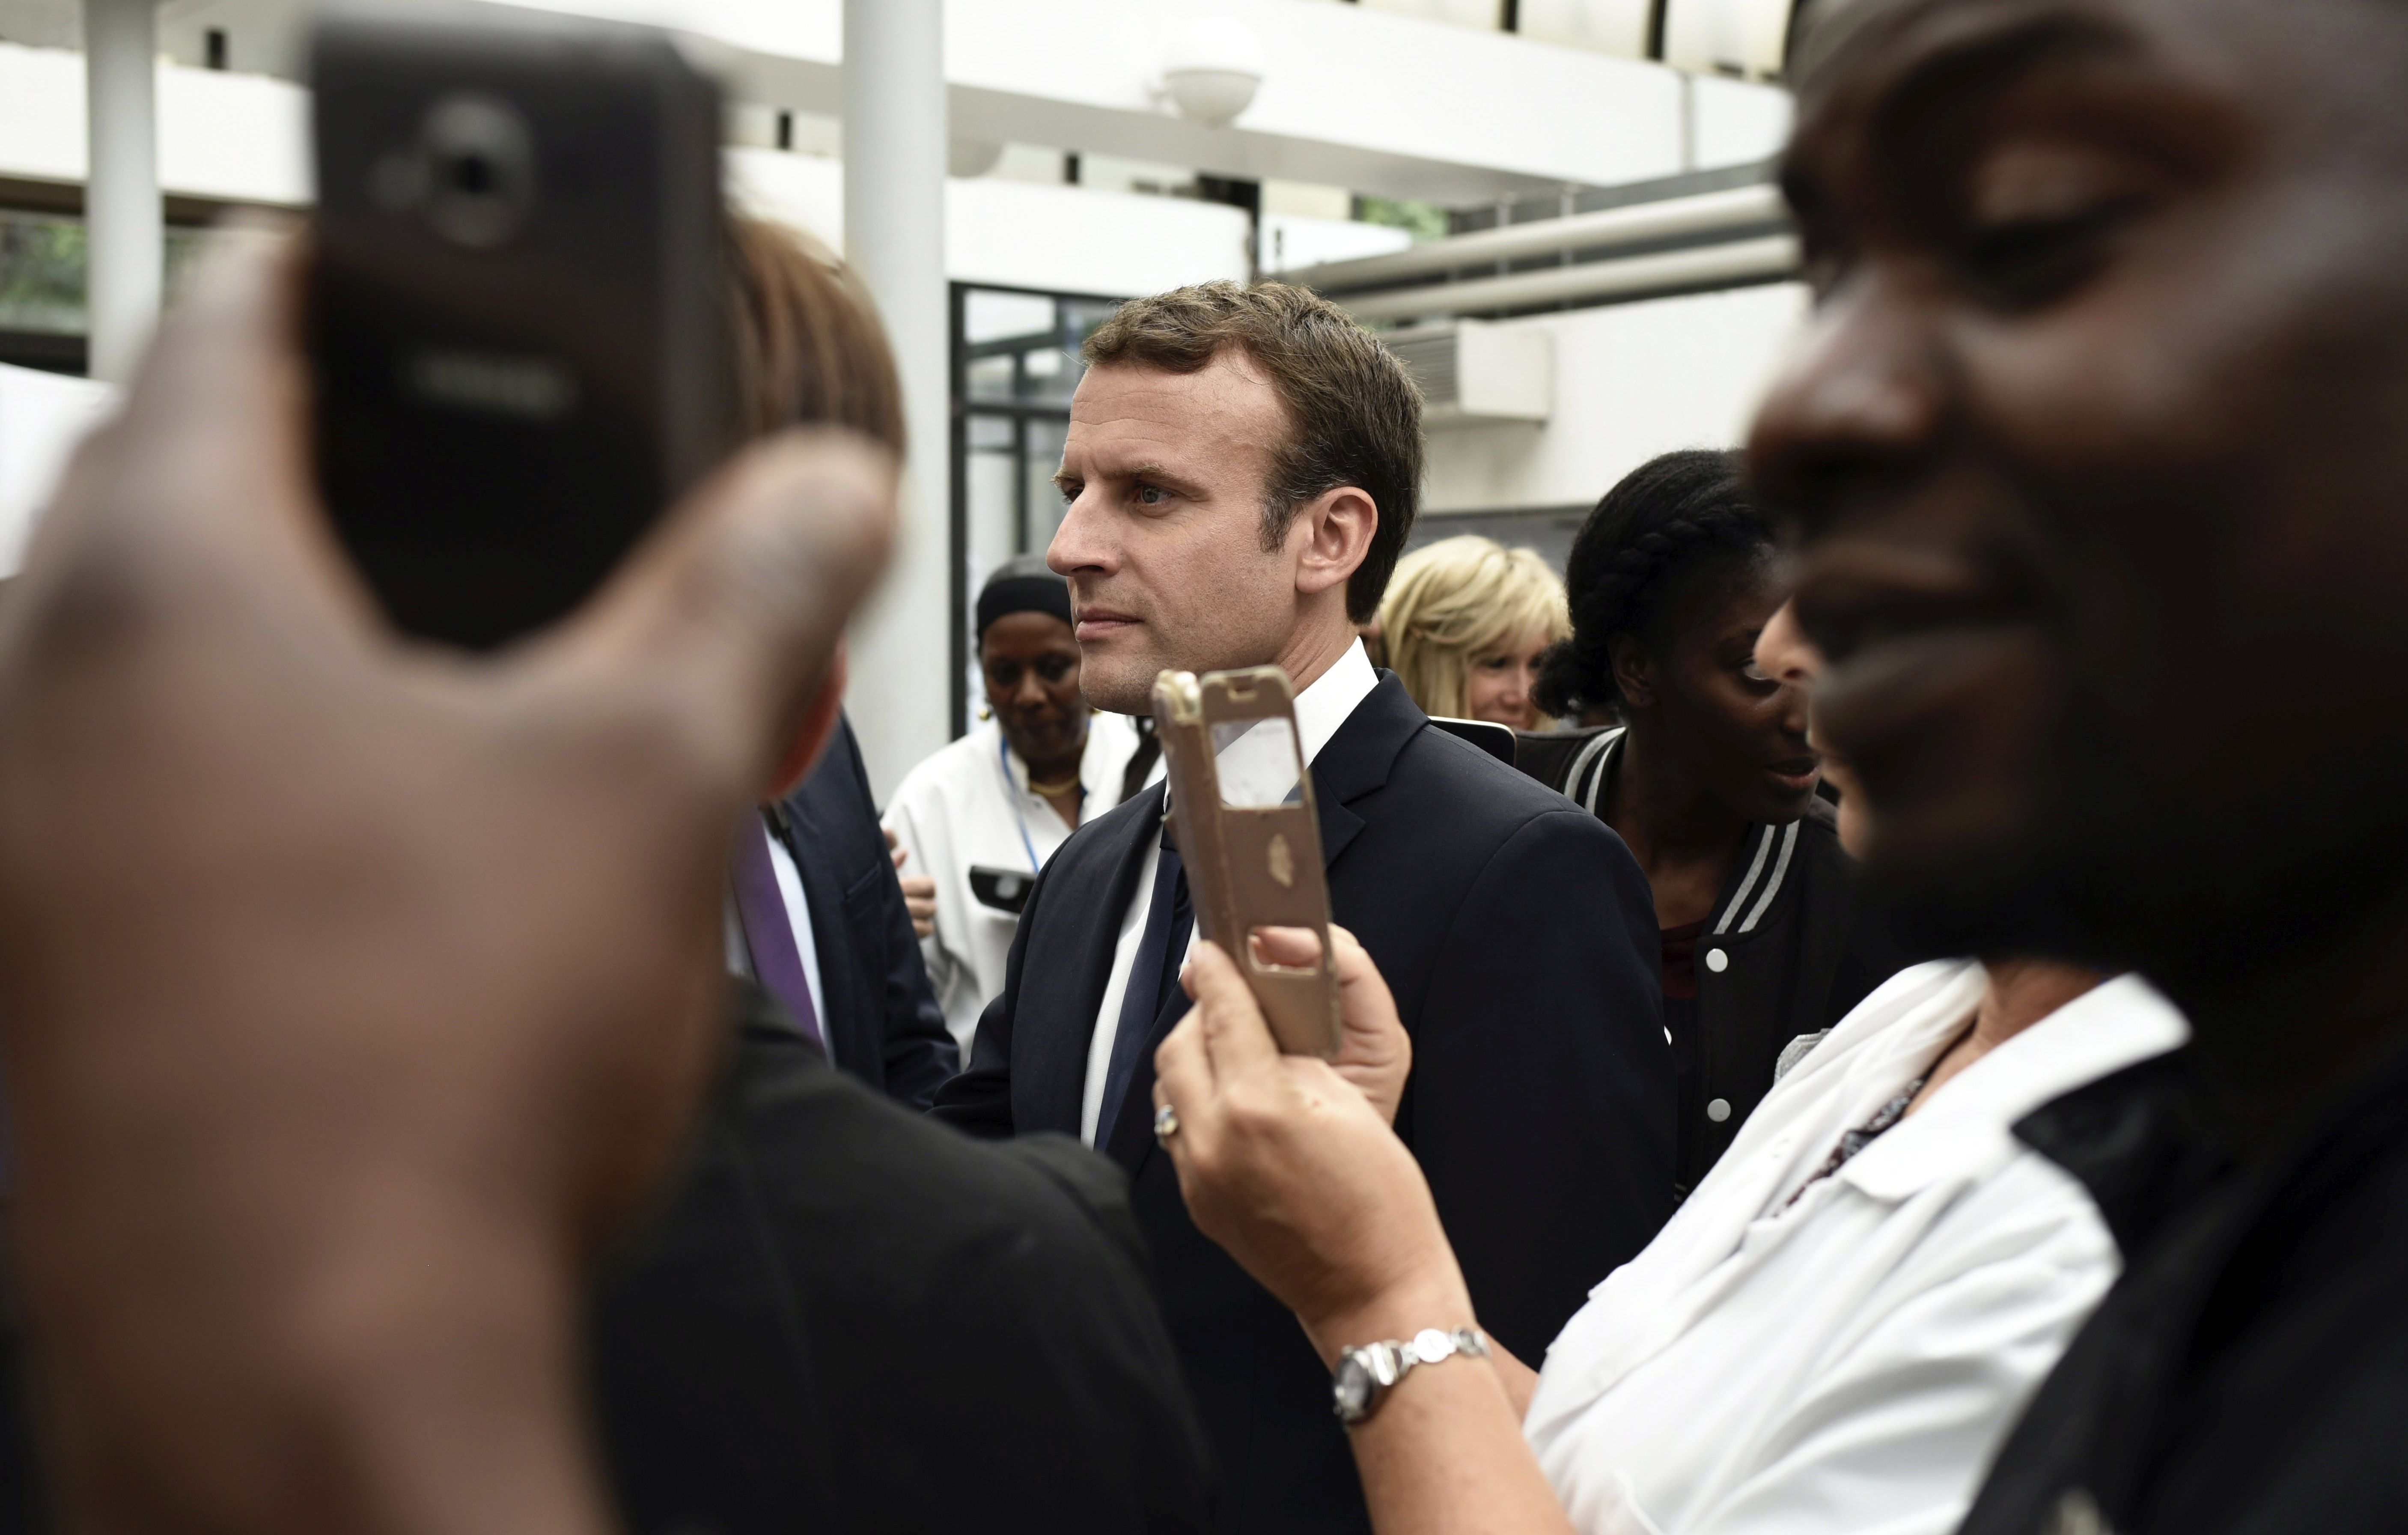 epa06133911 French President Emmanuel Macron (C) during a visit to the Robert Debre pediatric hospital in Paris, france, 09 August 2017.  EPA/PHILIPPE LOPEZ / POOL MAXPPP OUT